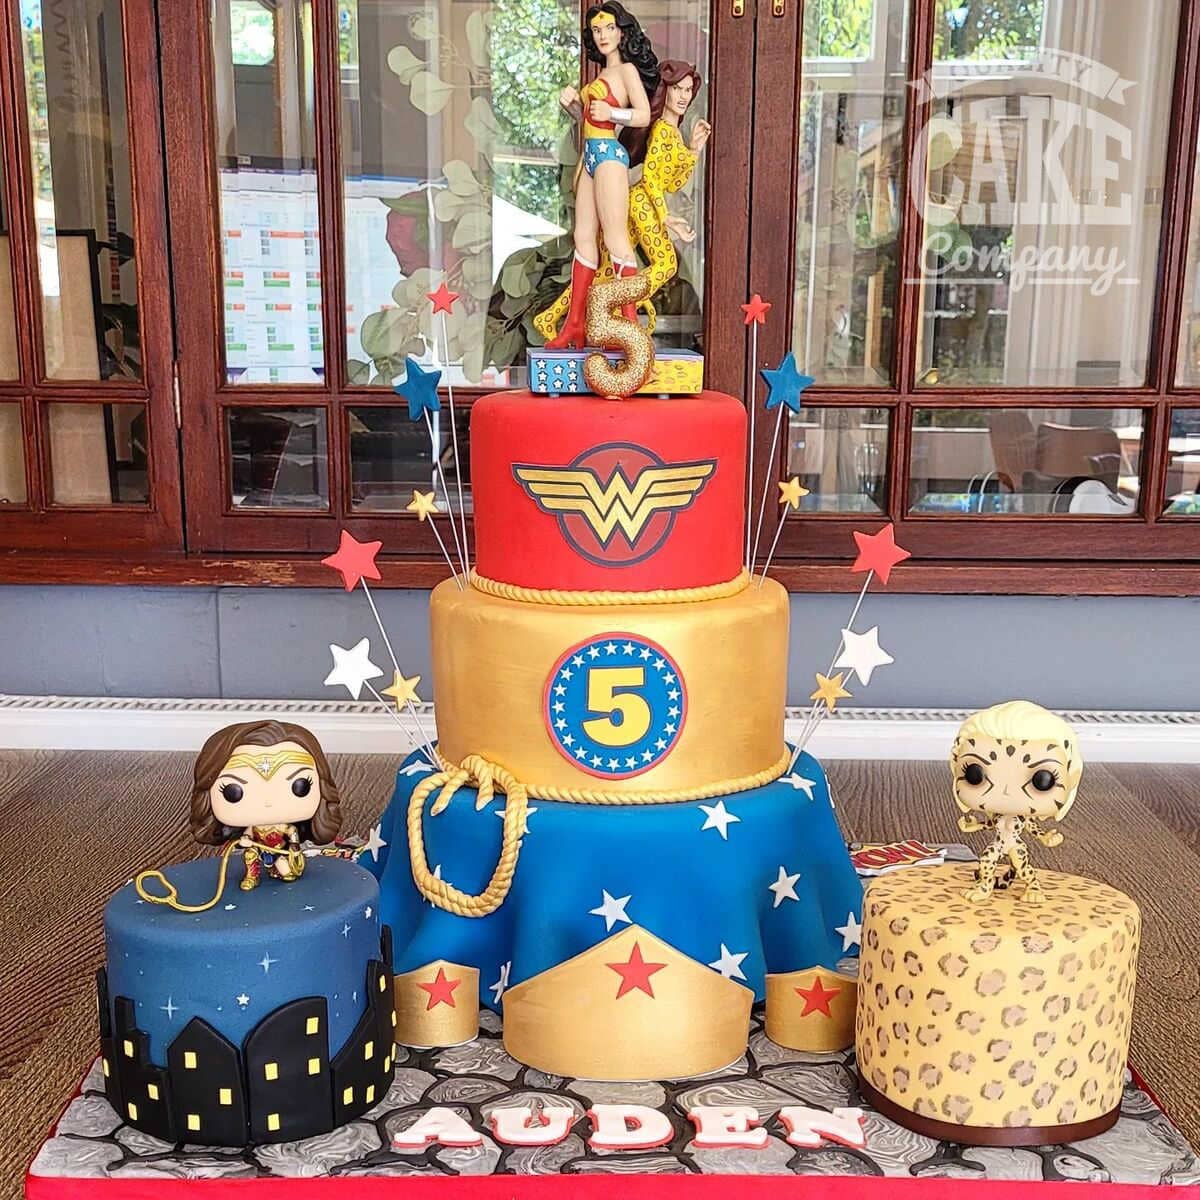 Wonderful Supergirl and Batman Cake - Between The Pages Blog